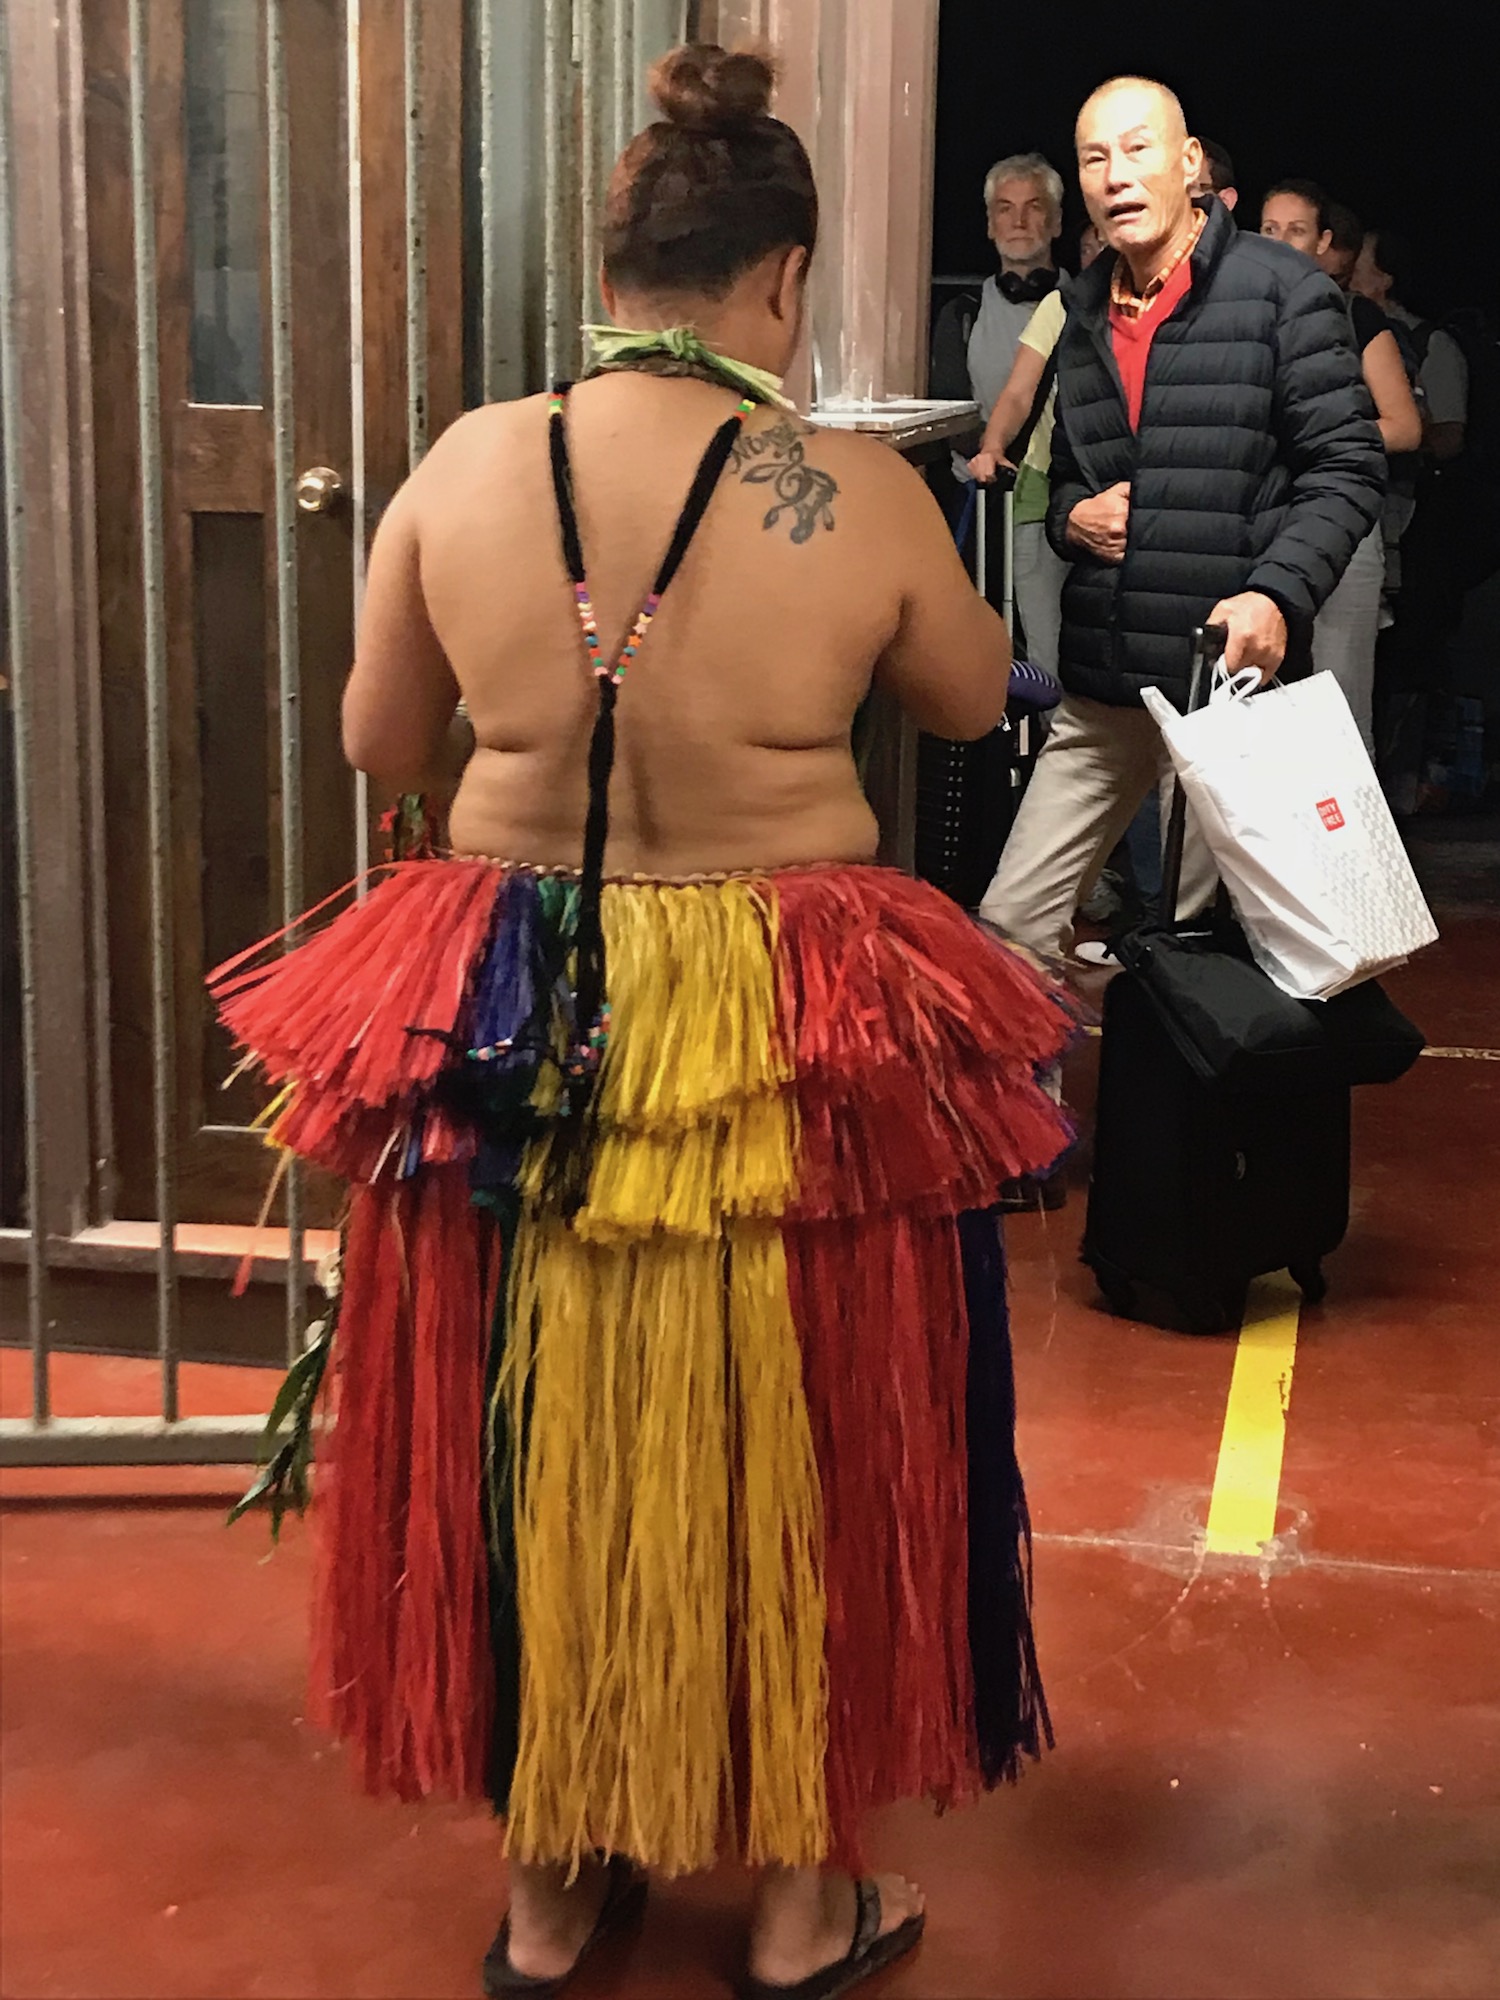 Woman in grass skirt greets visitors at Yap airport